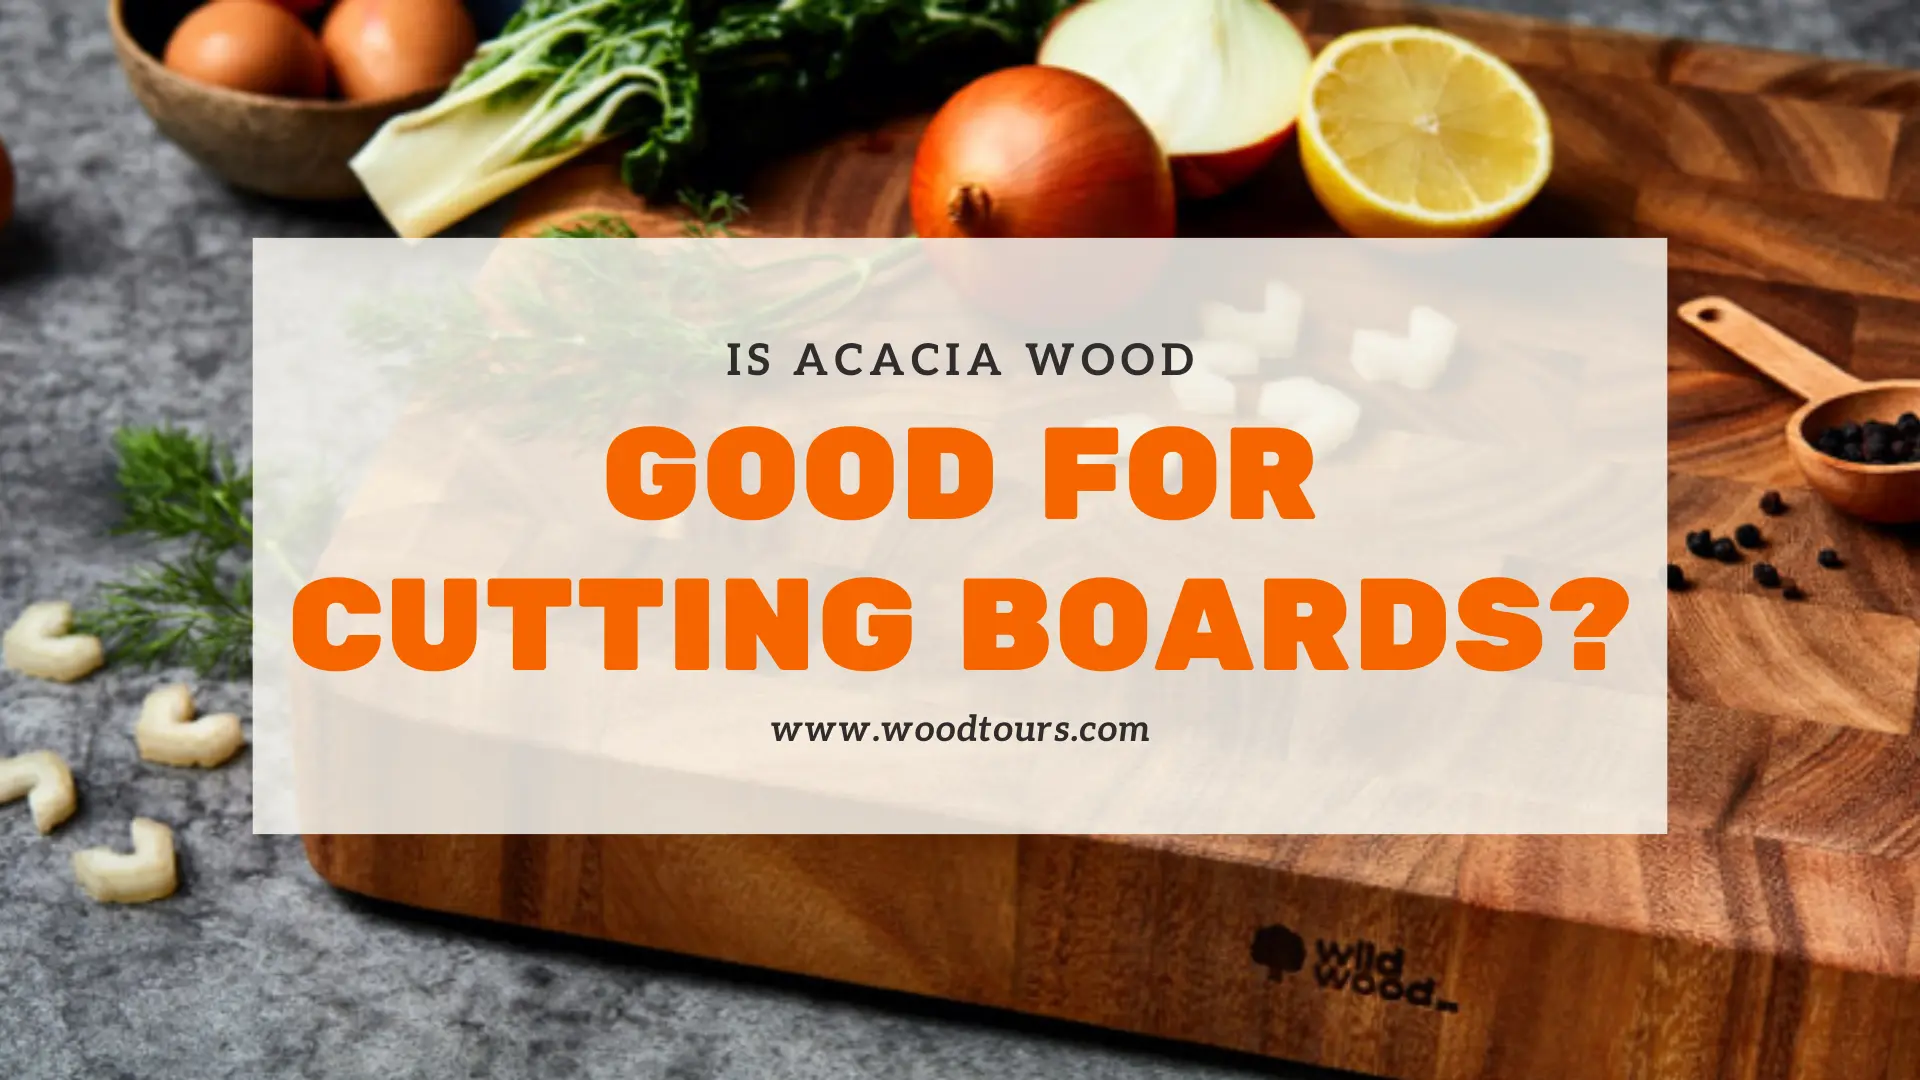 Is Acacia Wood Good for Cutting Boards